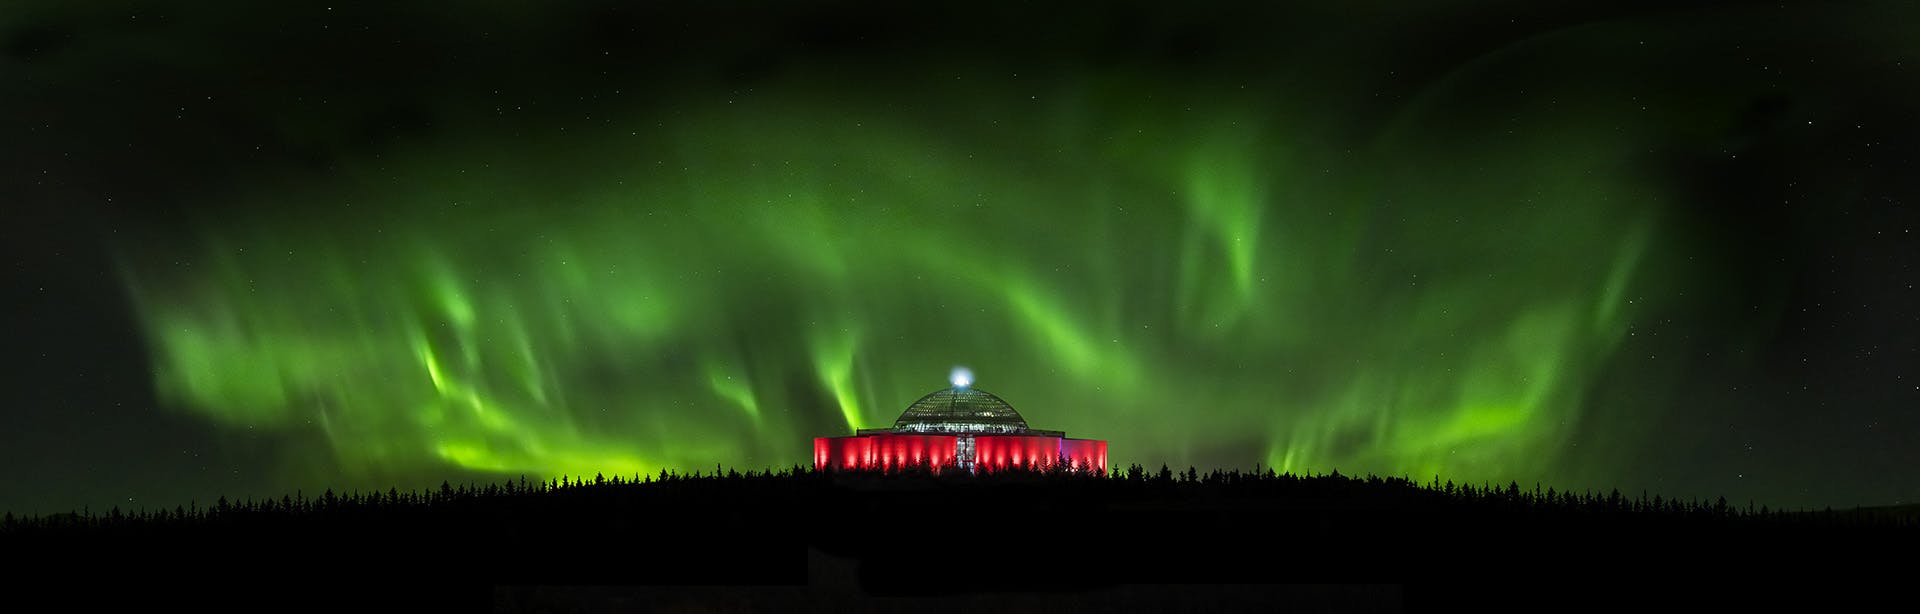 Photo of Northern Lights over Perlan